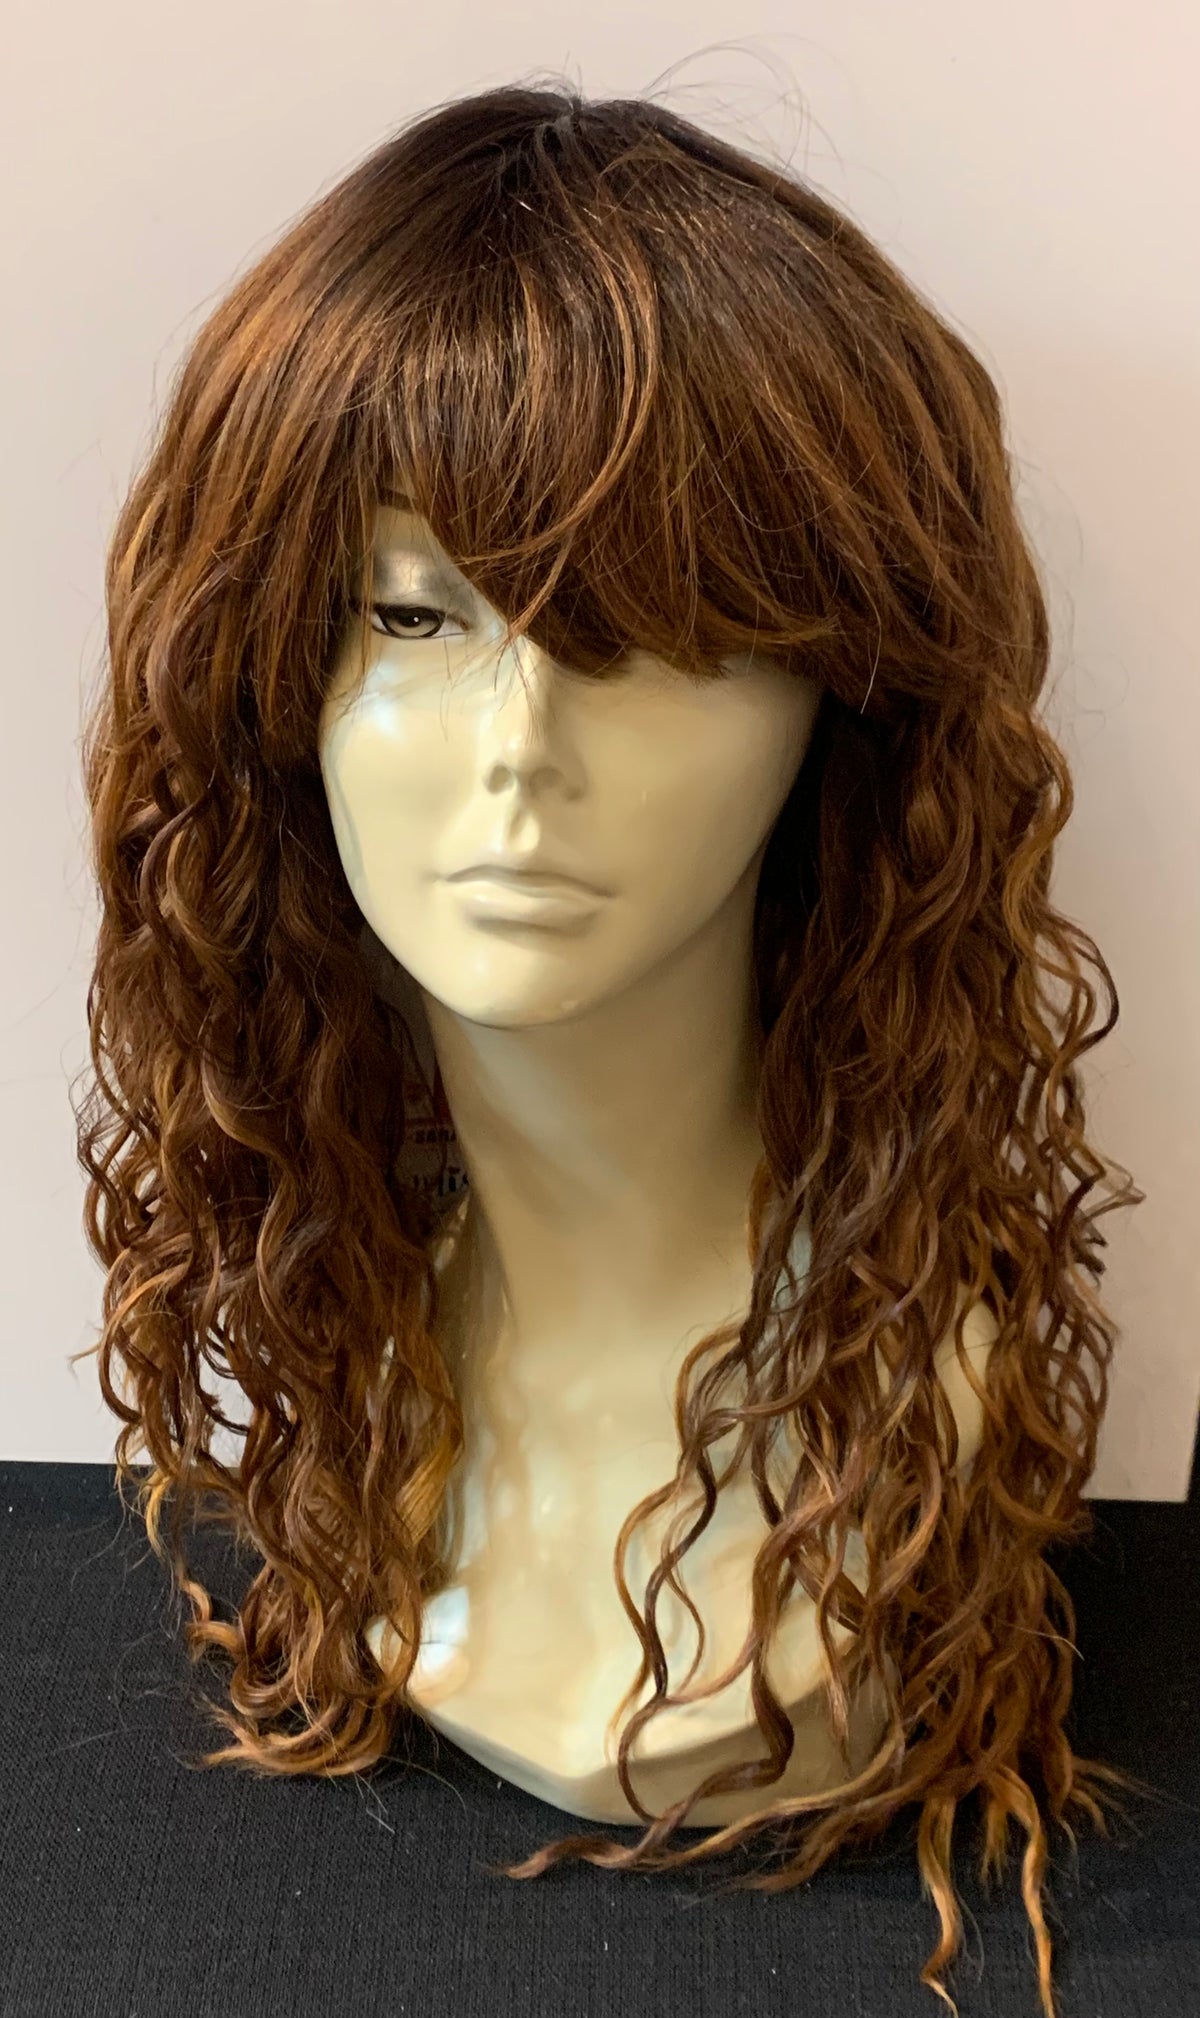 Long Tight Curl Wig with Bangs - Auburn - Model Express Vancouver